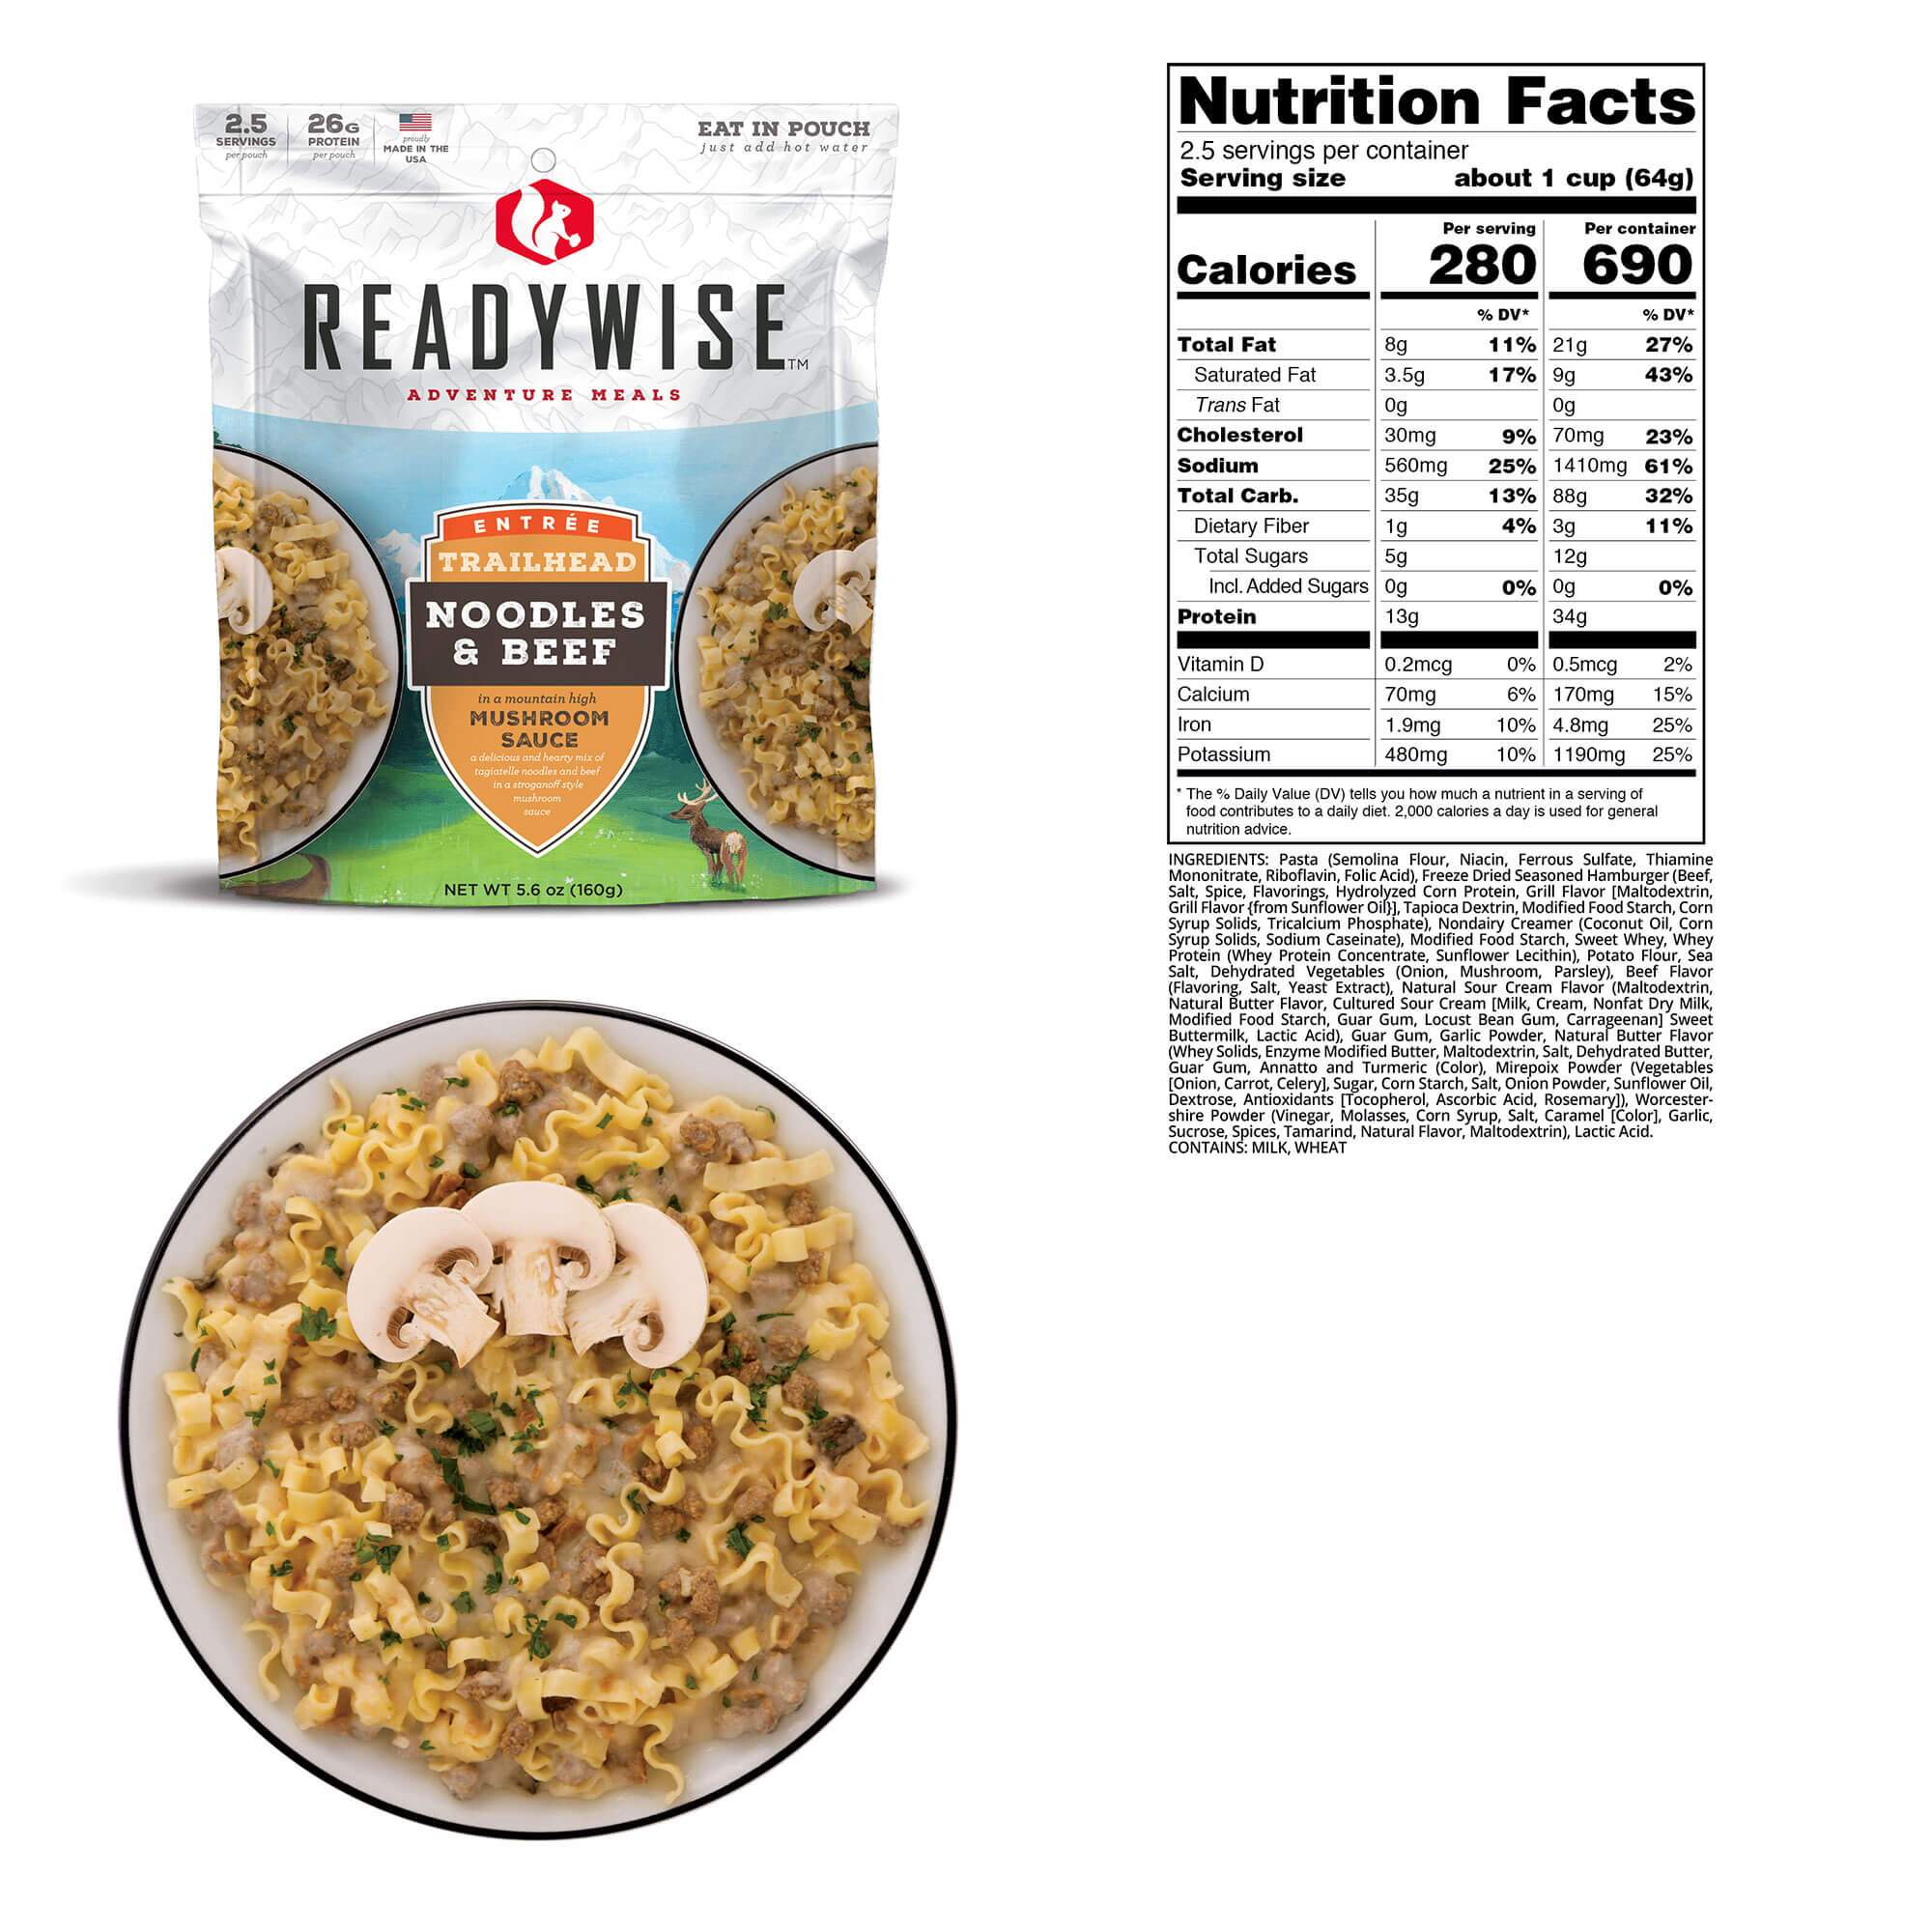 A package of ReadyWise (formerly Wise Food Storage) Hunting Food Calorie Booster Emergency Food Bucket - (SHIPS IN 1-2 WEEKS) mushroom risotto next to a bag of rice.